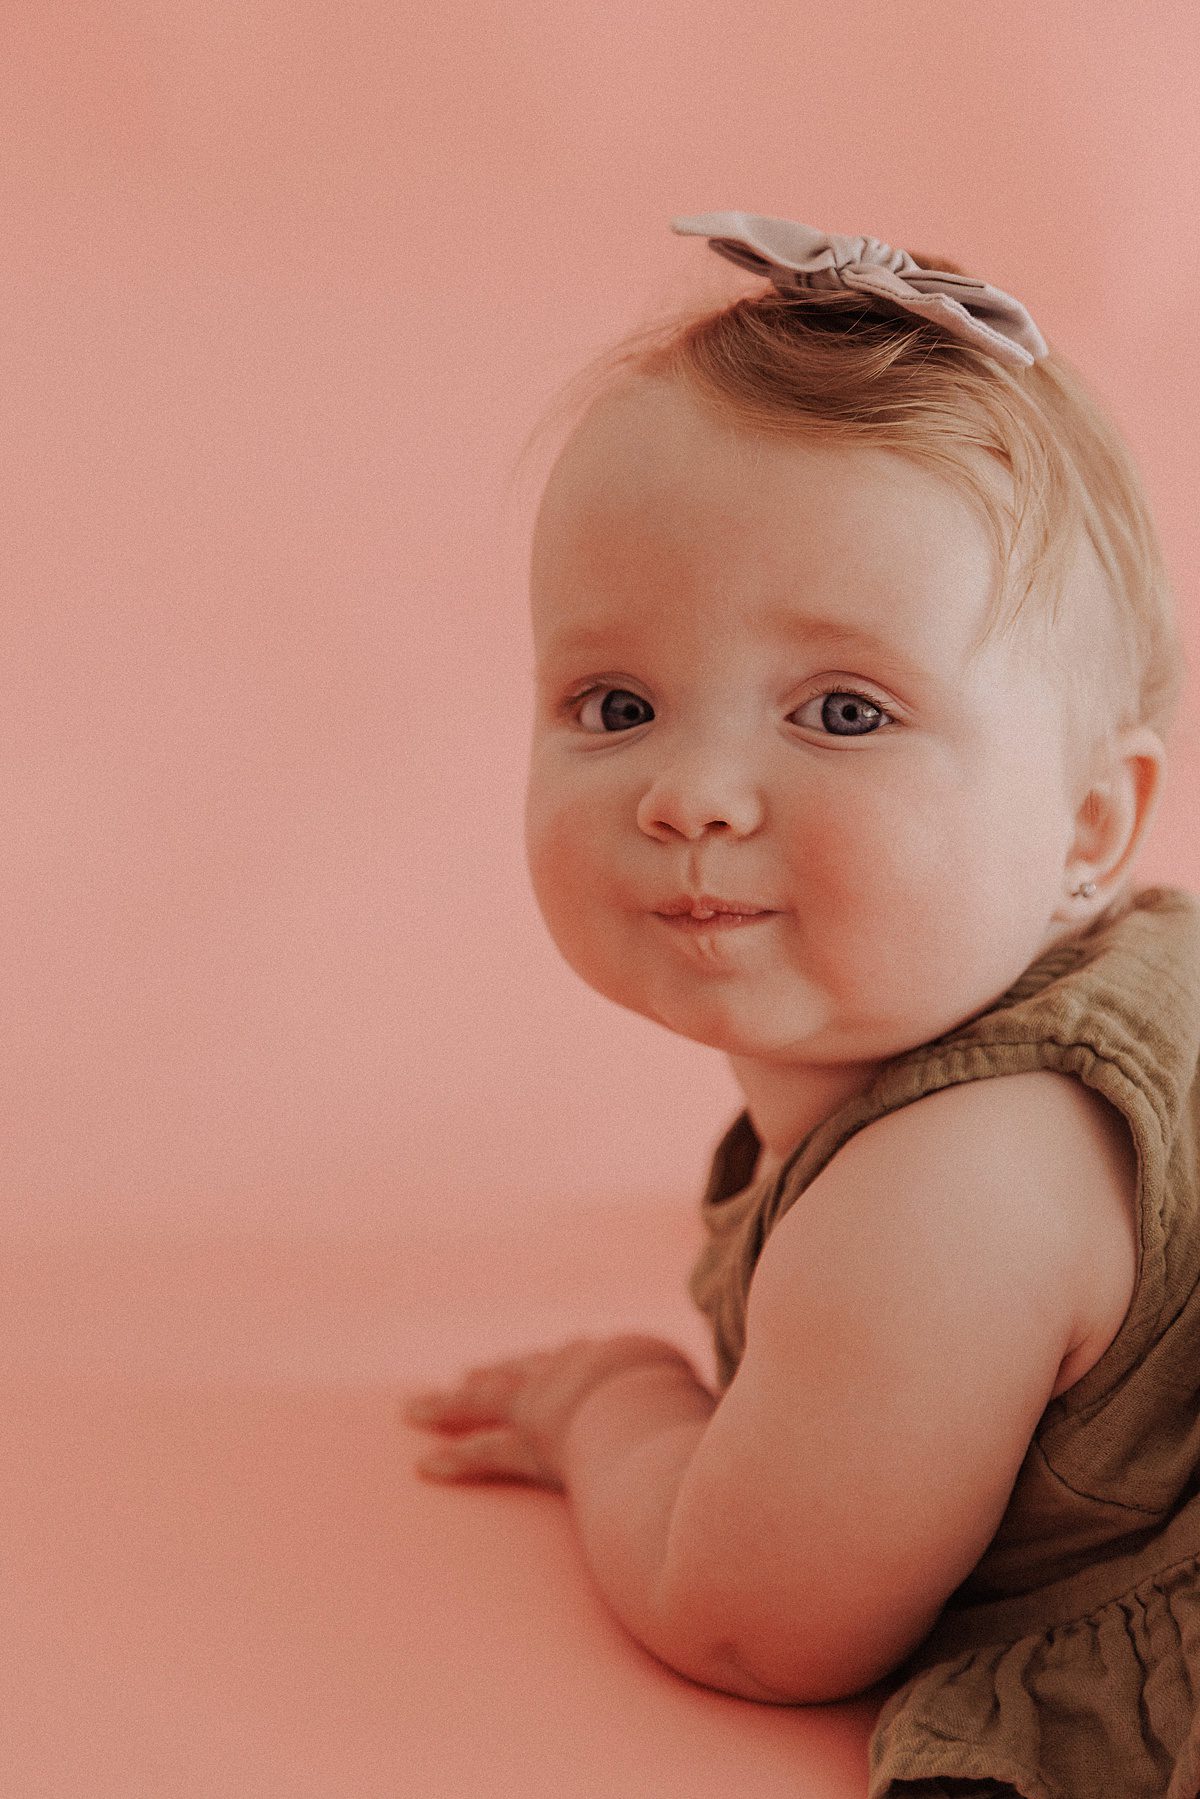 Baby on a pink background